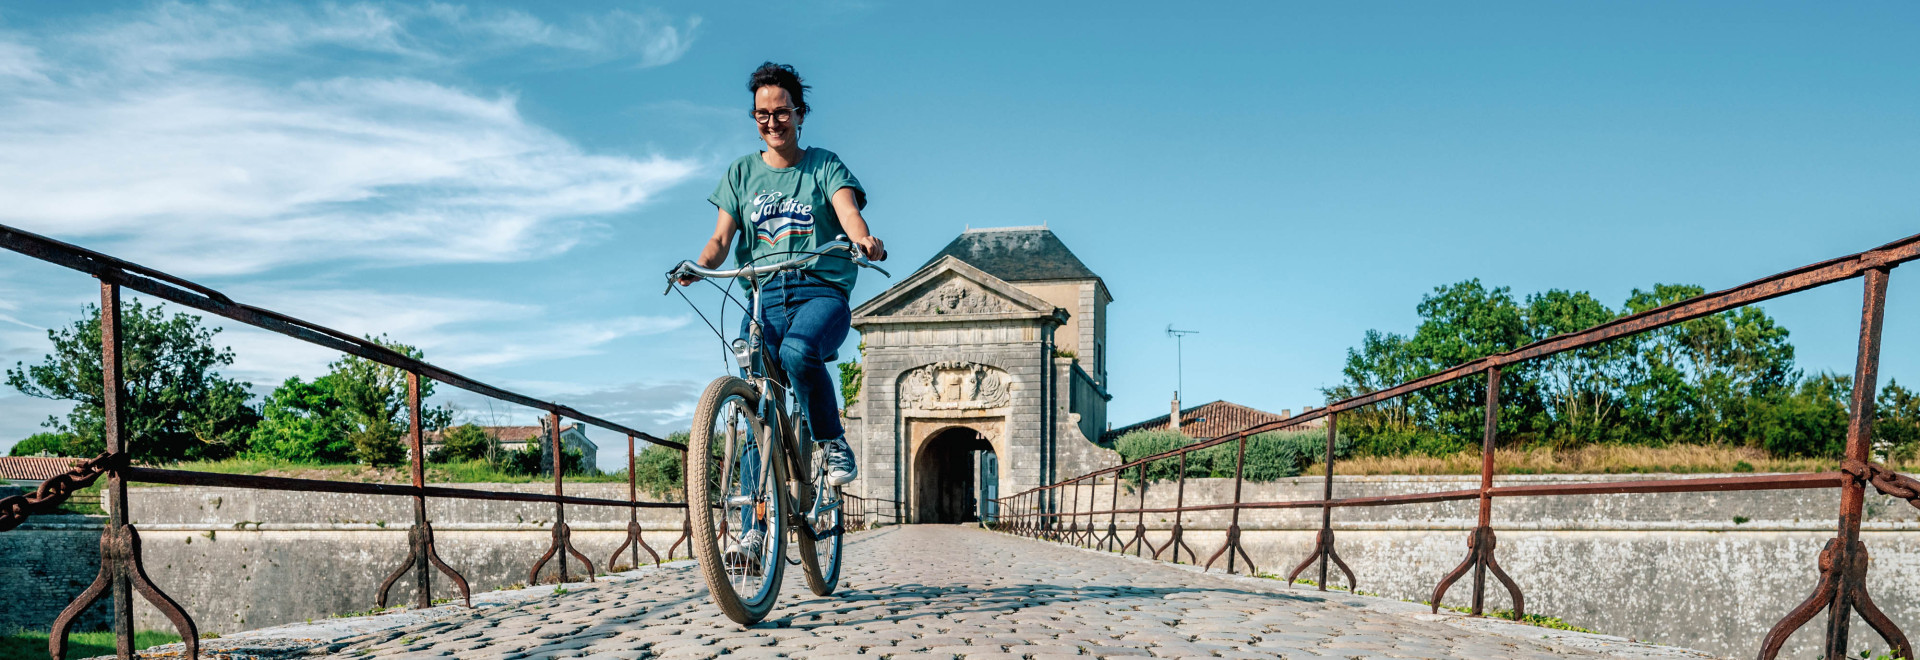 Discovery by bike: stroll through the streets of Saint-Martin-de-Ré